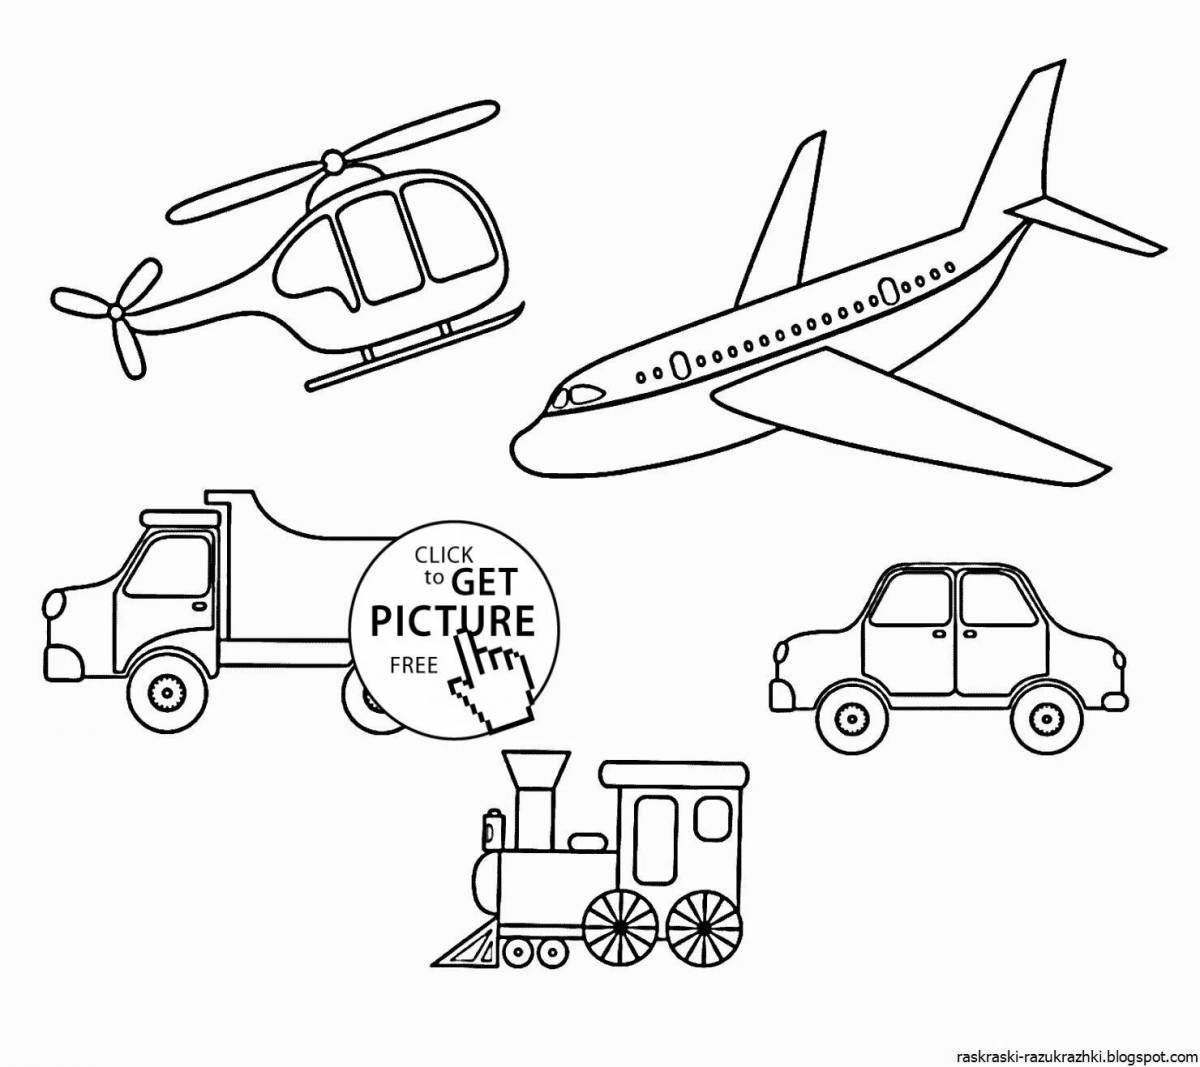 Outstanding air transport coloring book for 6-7 year olds